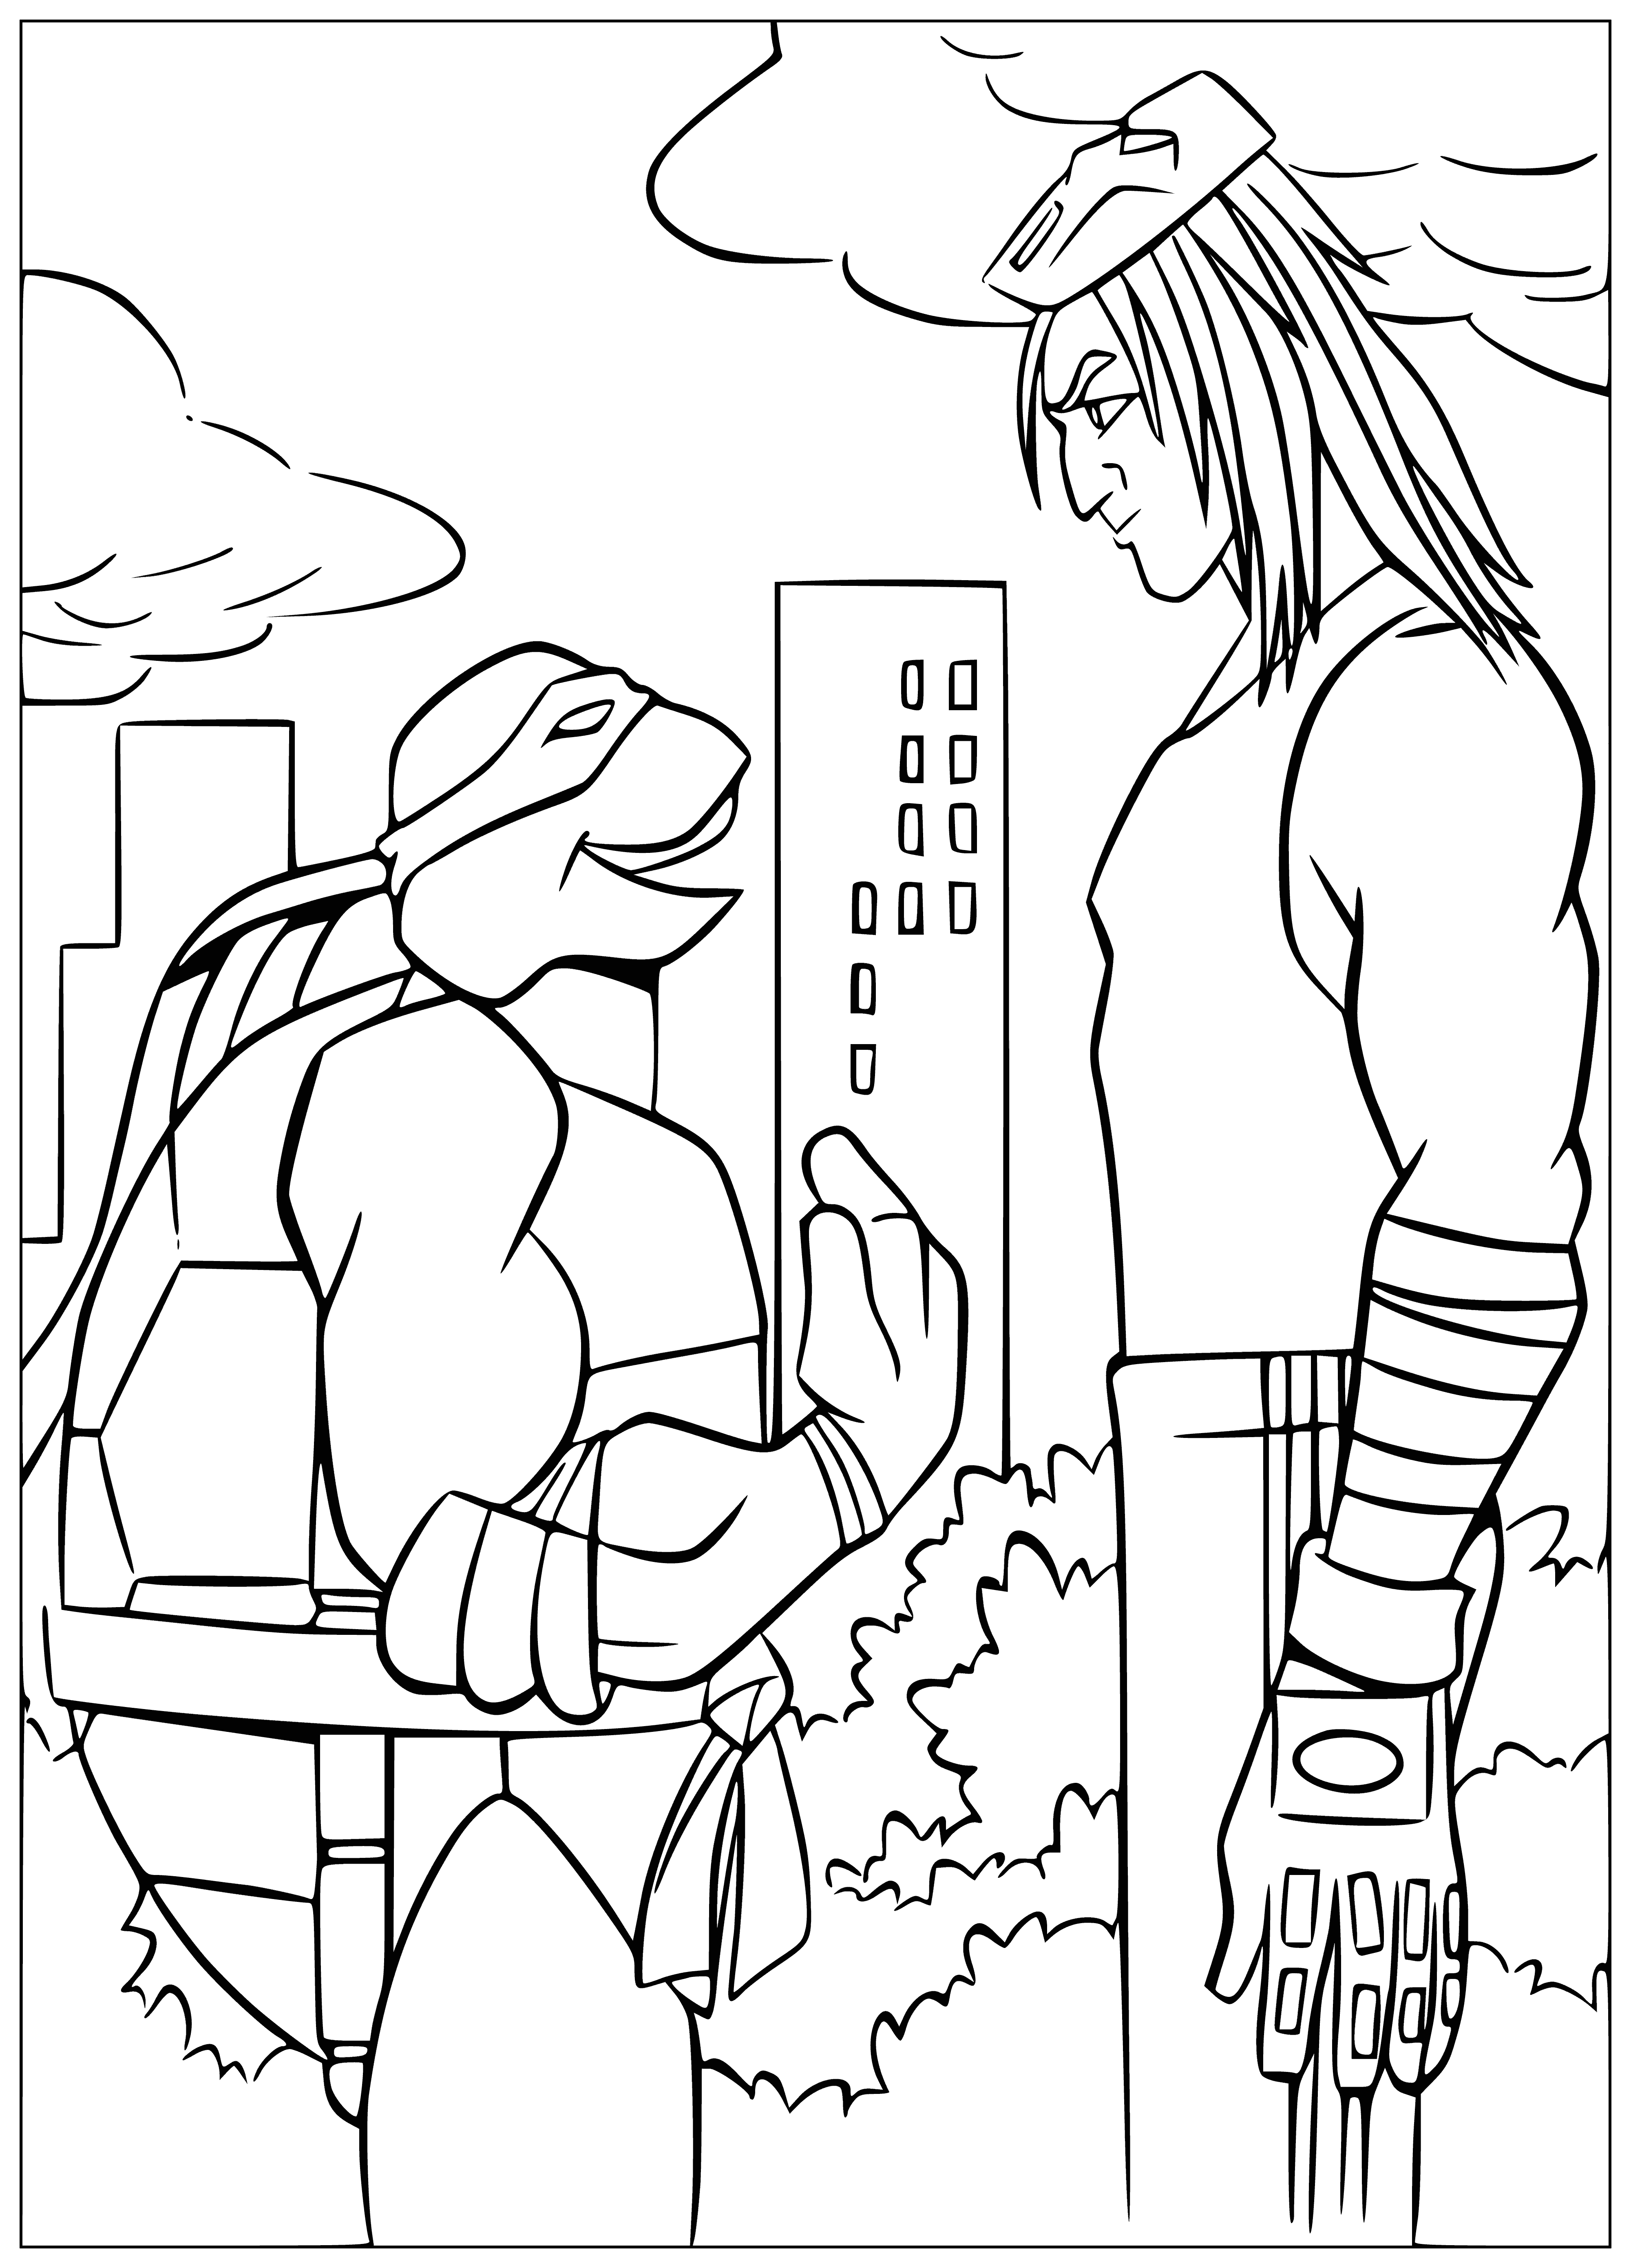 coloring page: The Ninja Turtles are 4 martial arts skilled turtles from NYC's sewers who fight crime under Leonardo's leadership, named after Renaissance artists.